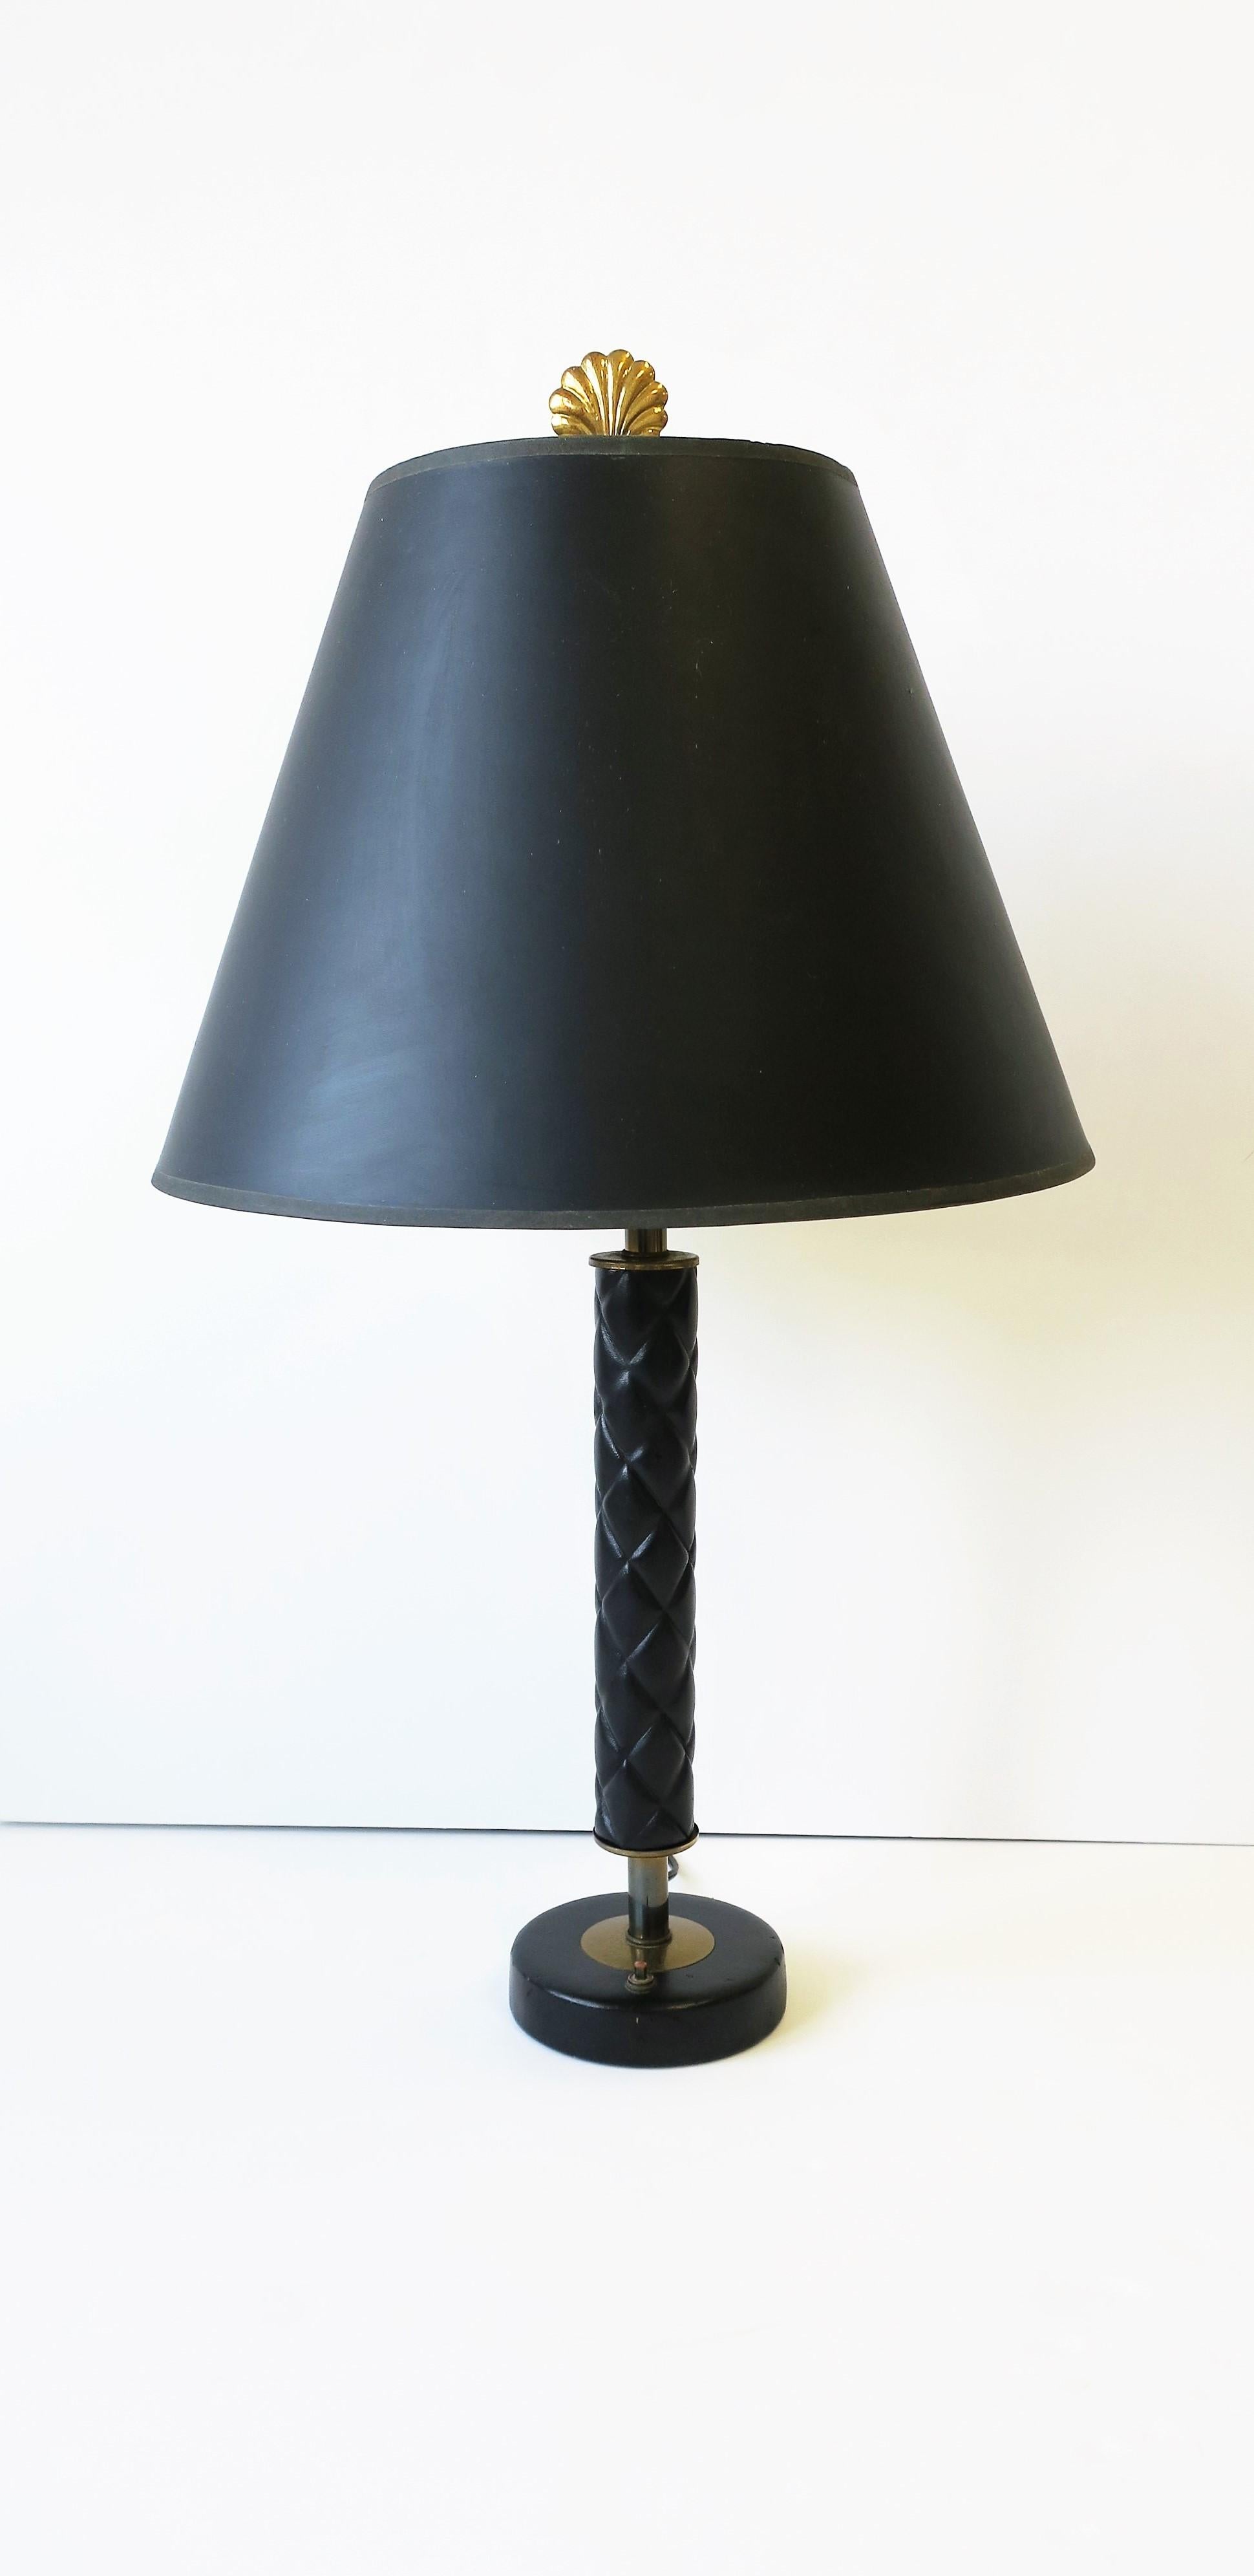 A very beautiful and chic '70s modern black quilted leather and brass desk or table lamp, circa 1970s or a little earlier.
On/Off switch in two areas; on base and at top/socket. 

Measures: 
5